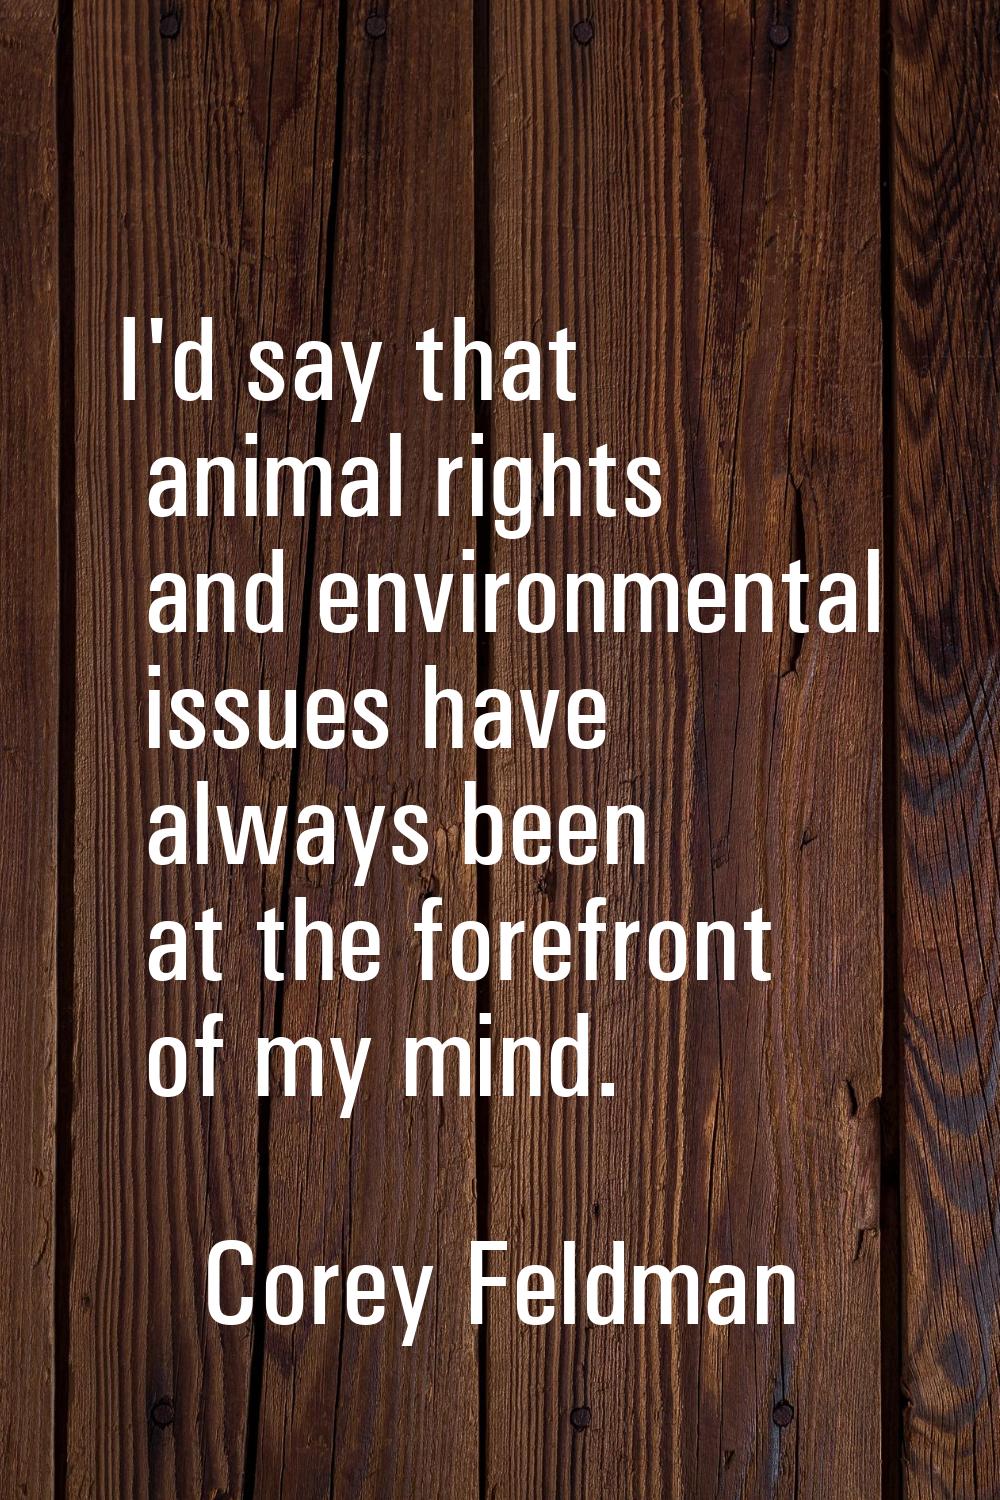 I'd say that animal rights and environmental issues have always been at the forefront of my mind.